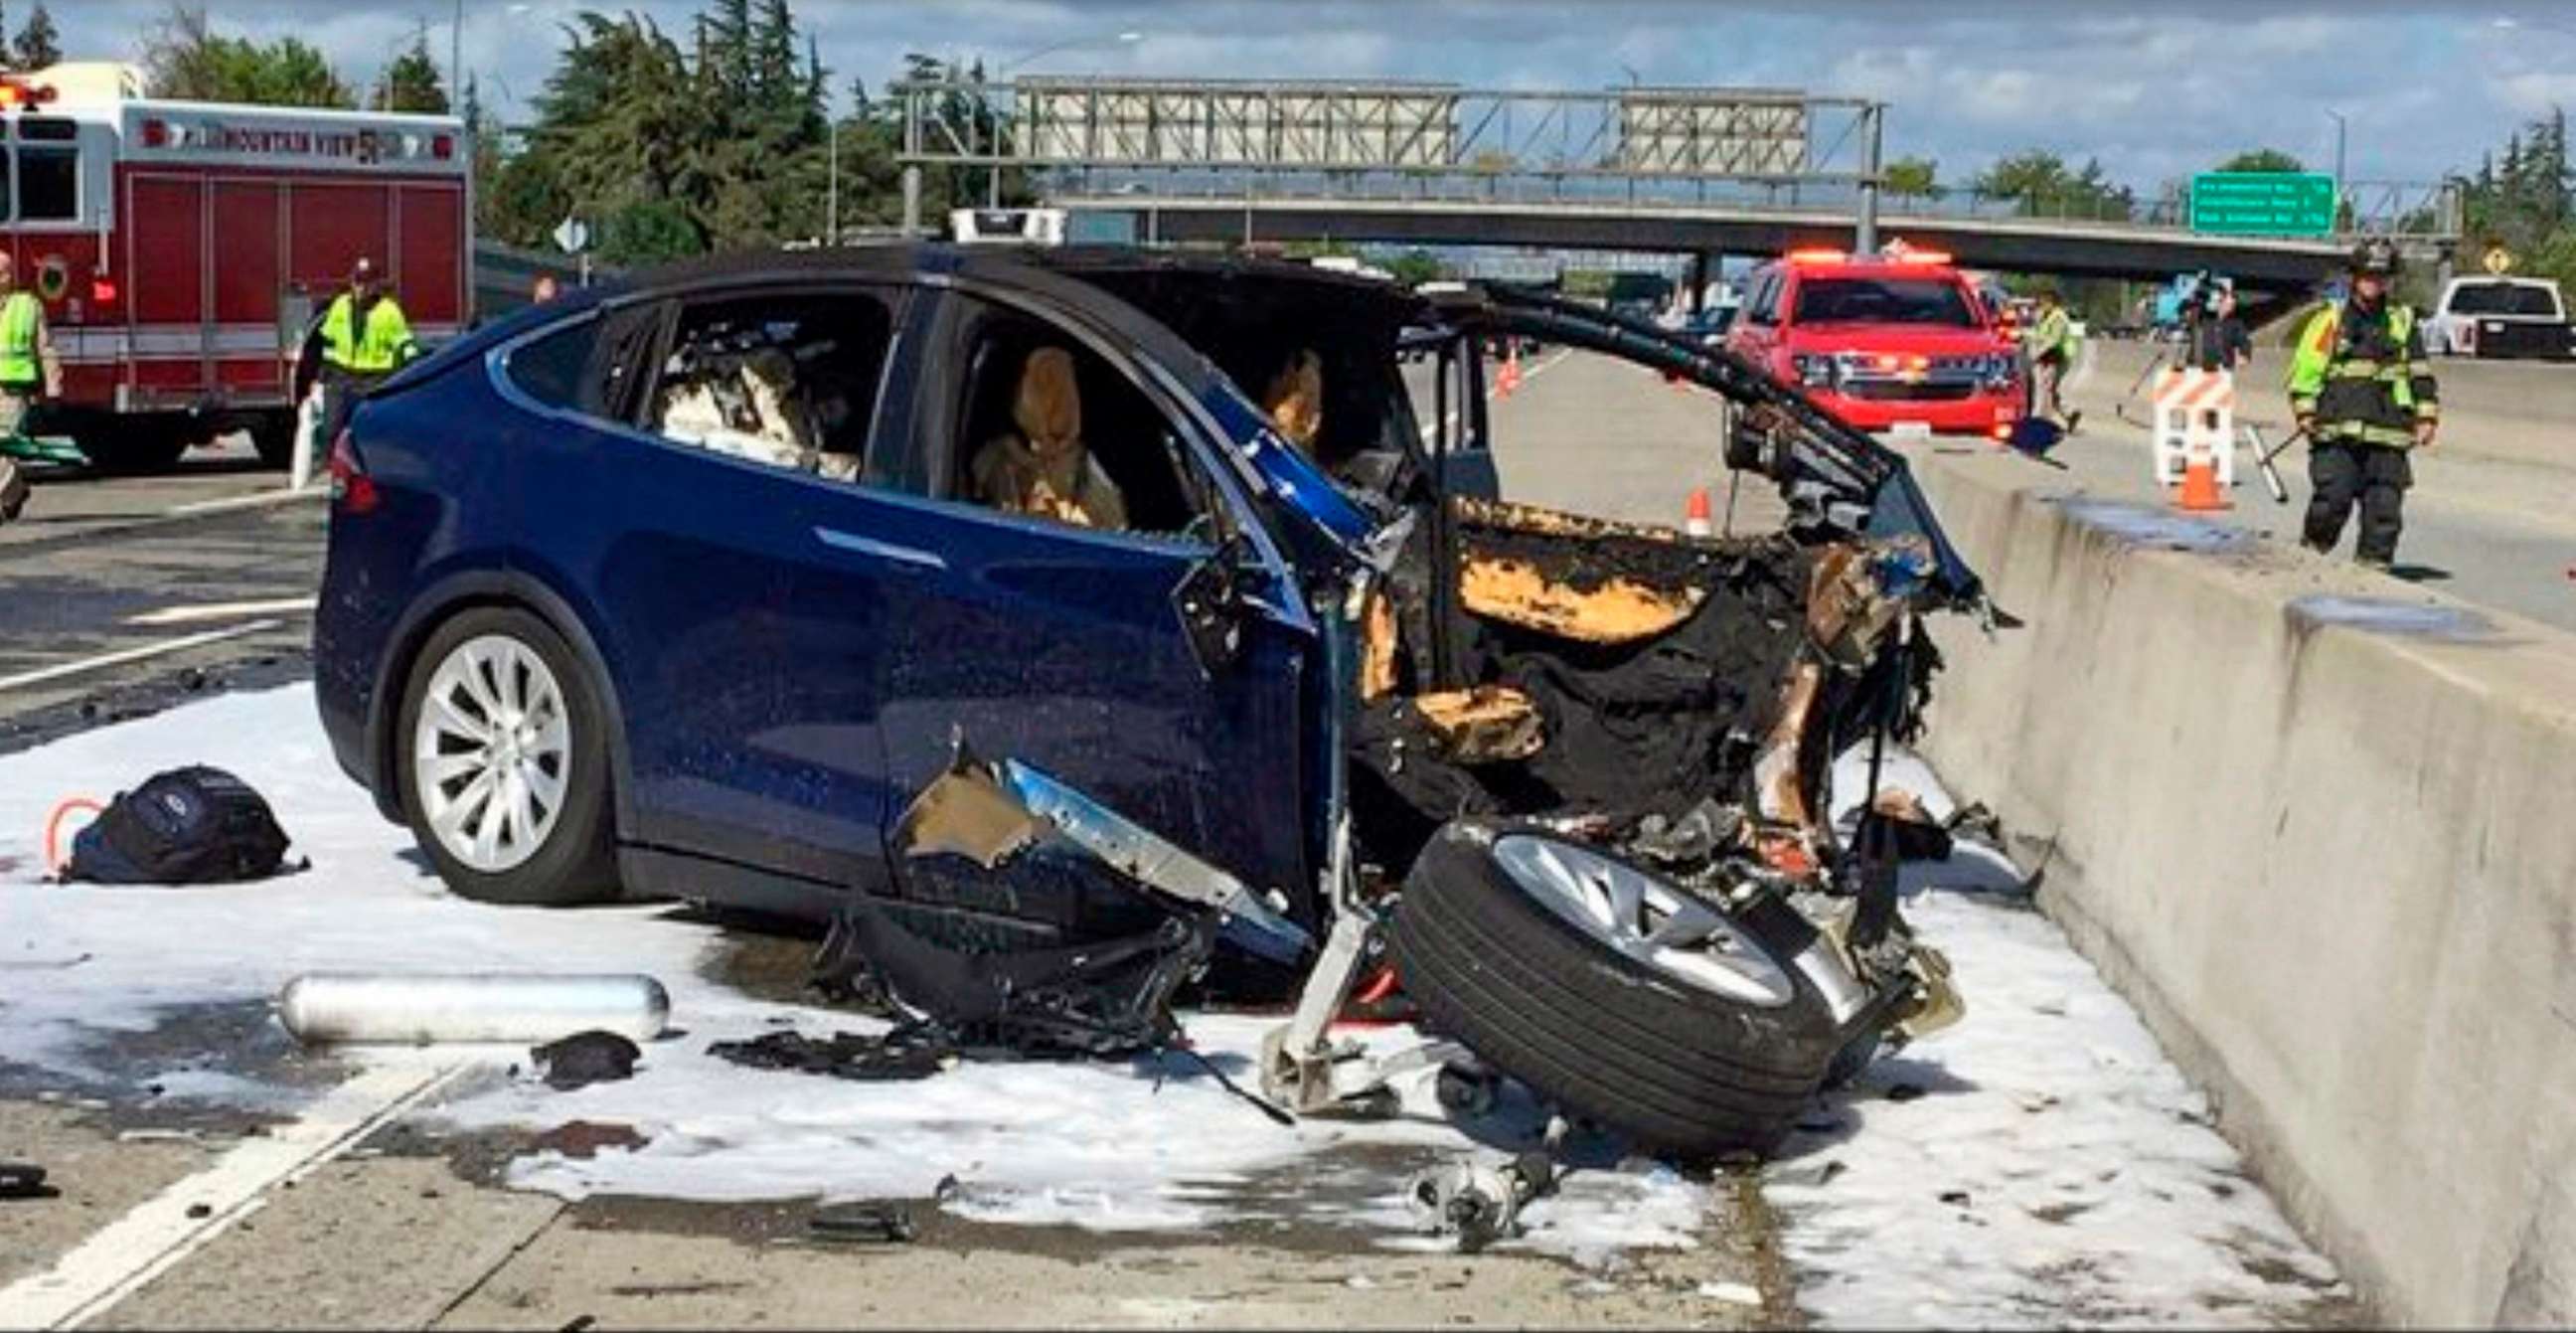 PHOTO: In this March 23, 2018 photo provided by KTVU, emergency personnel work a the scene where a Tesla electric SUV crashed into a barrier on U.S. Highway 101 in Mountain View, Calif.